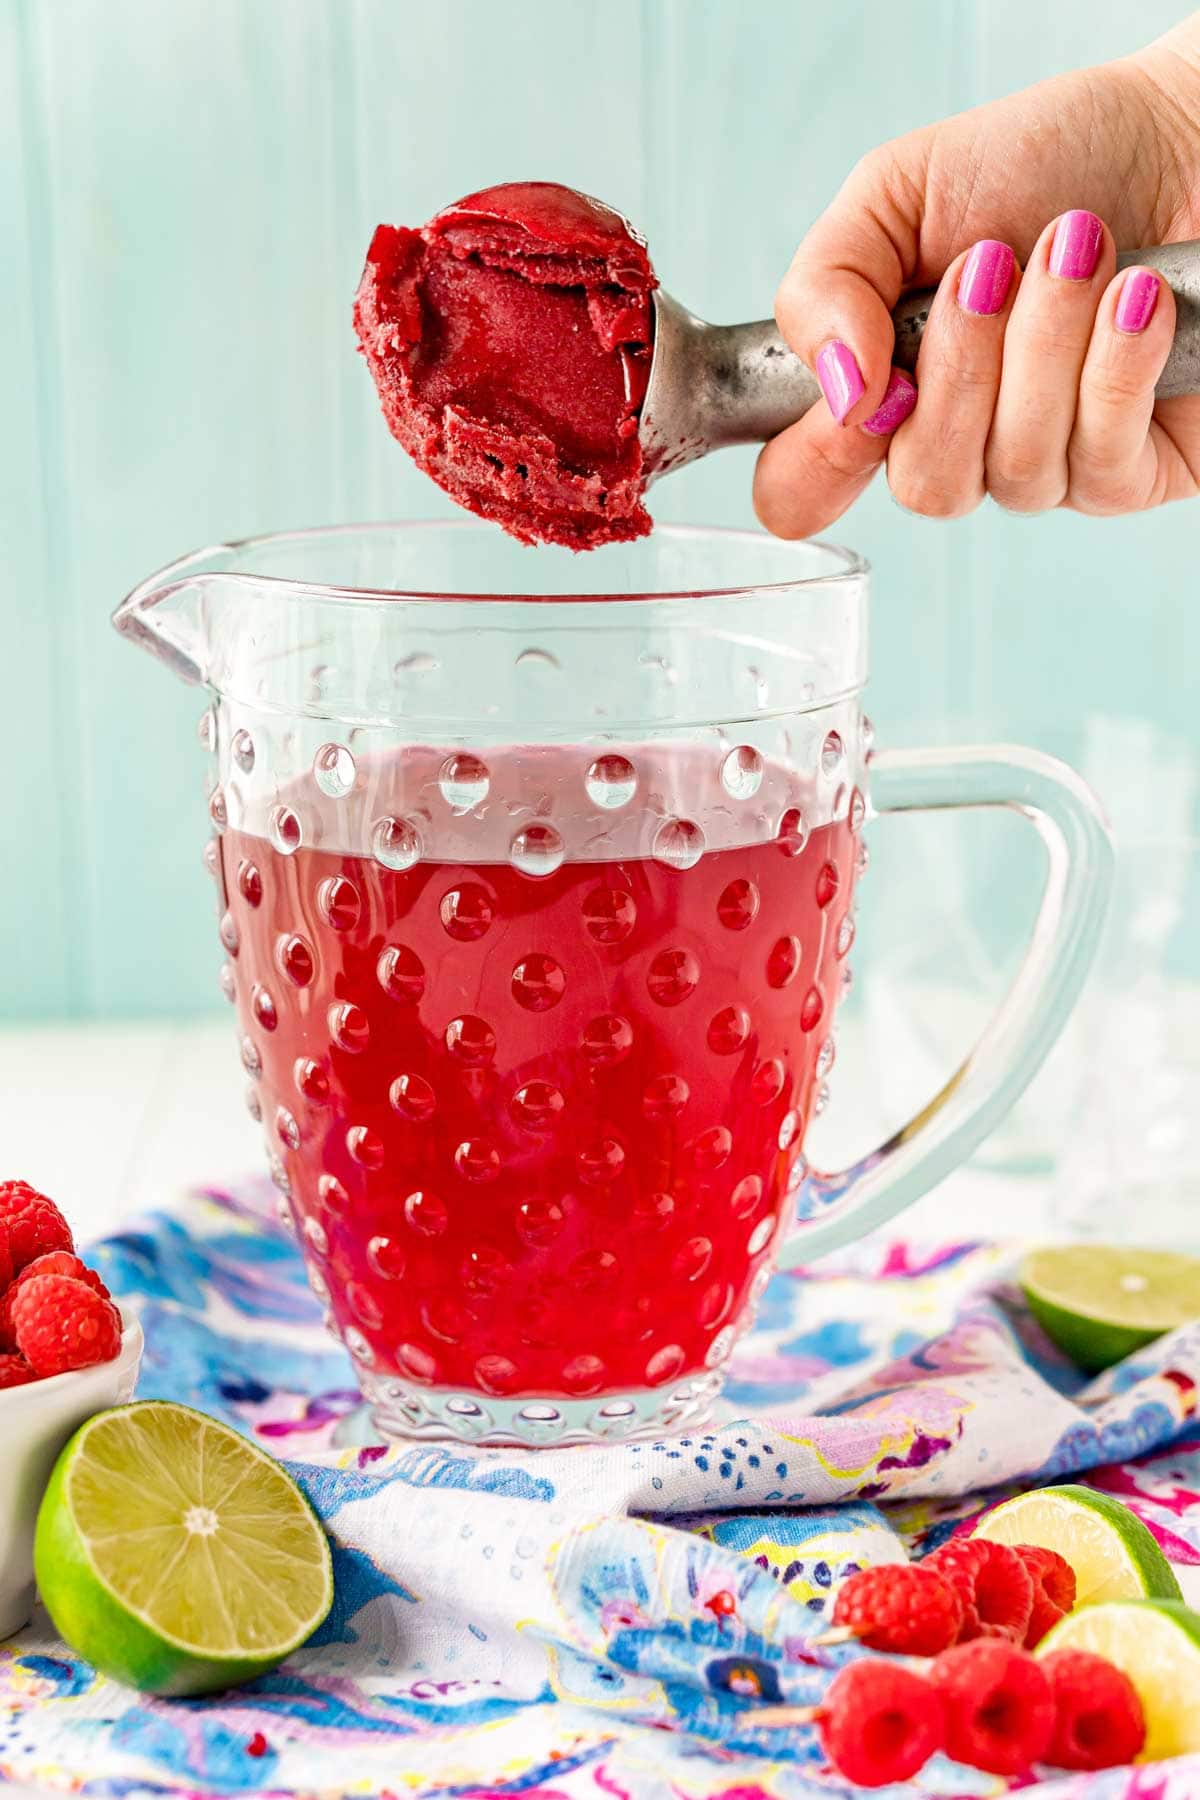 A hand holding an ice cream scoop with raspberry sorbet and a pitcher with raspberry juice